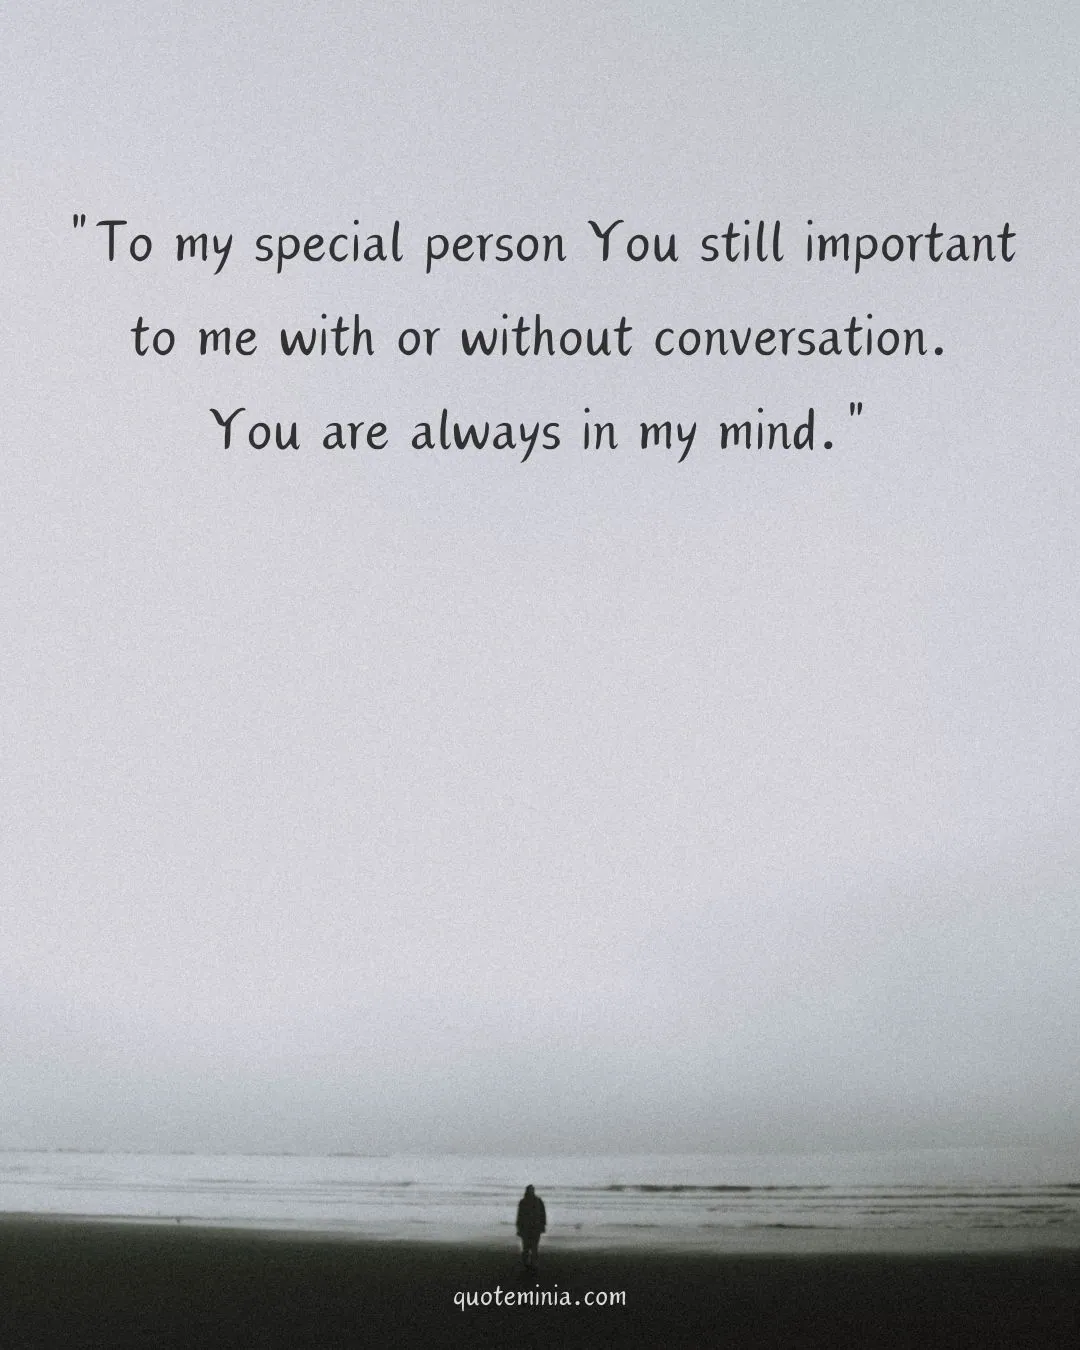 You Are So Special to Me Quotes Image 2